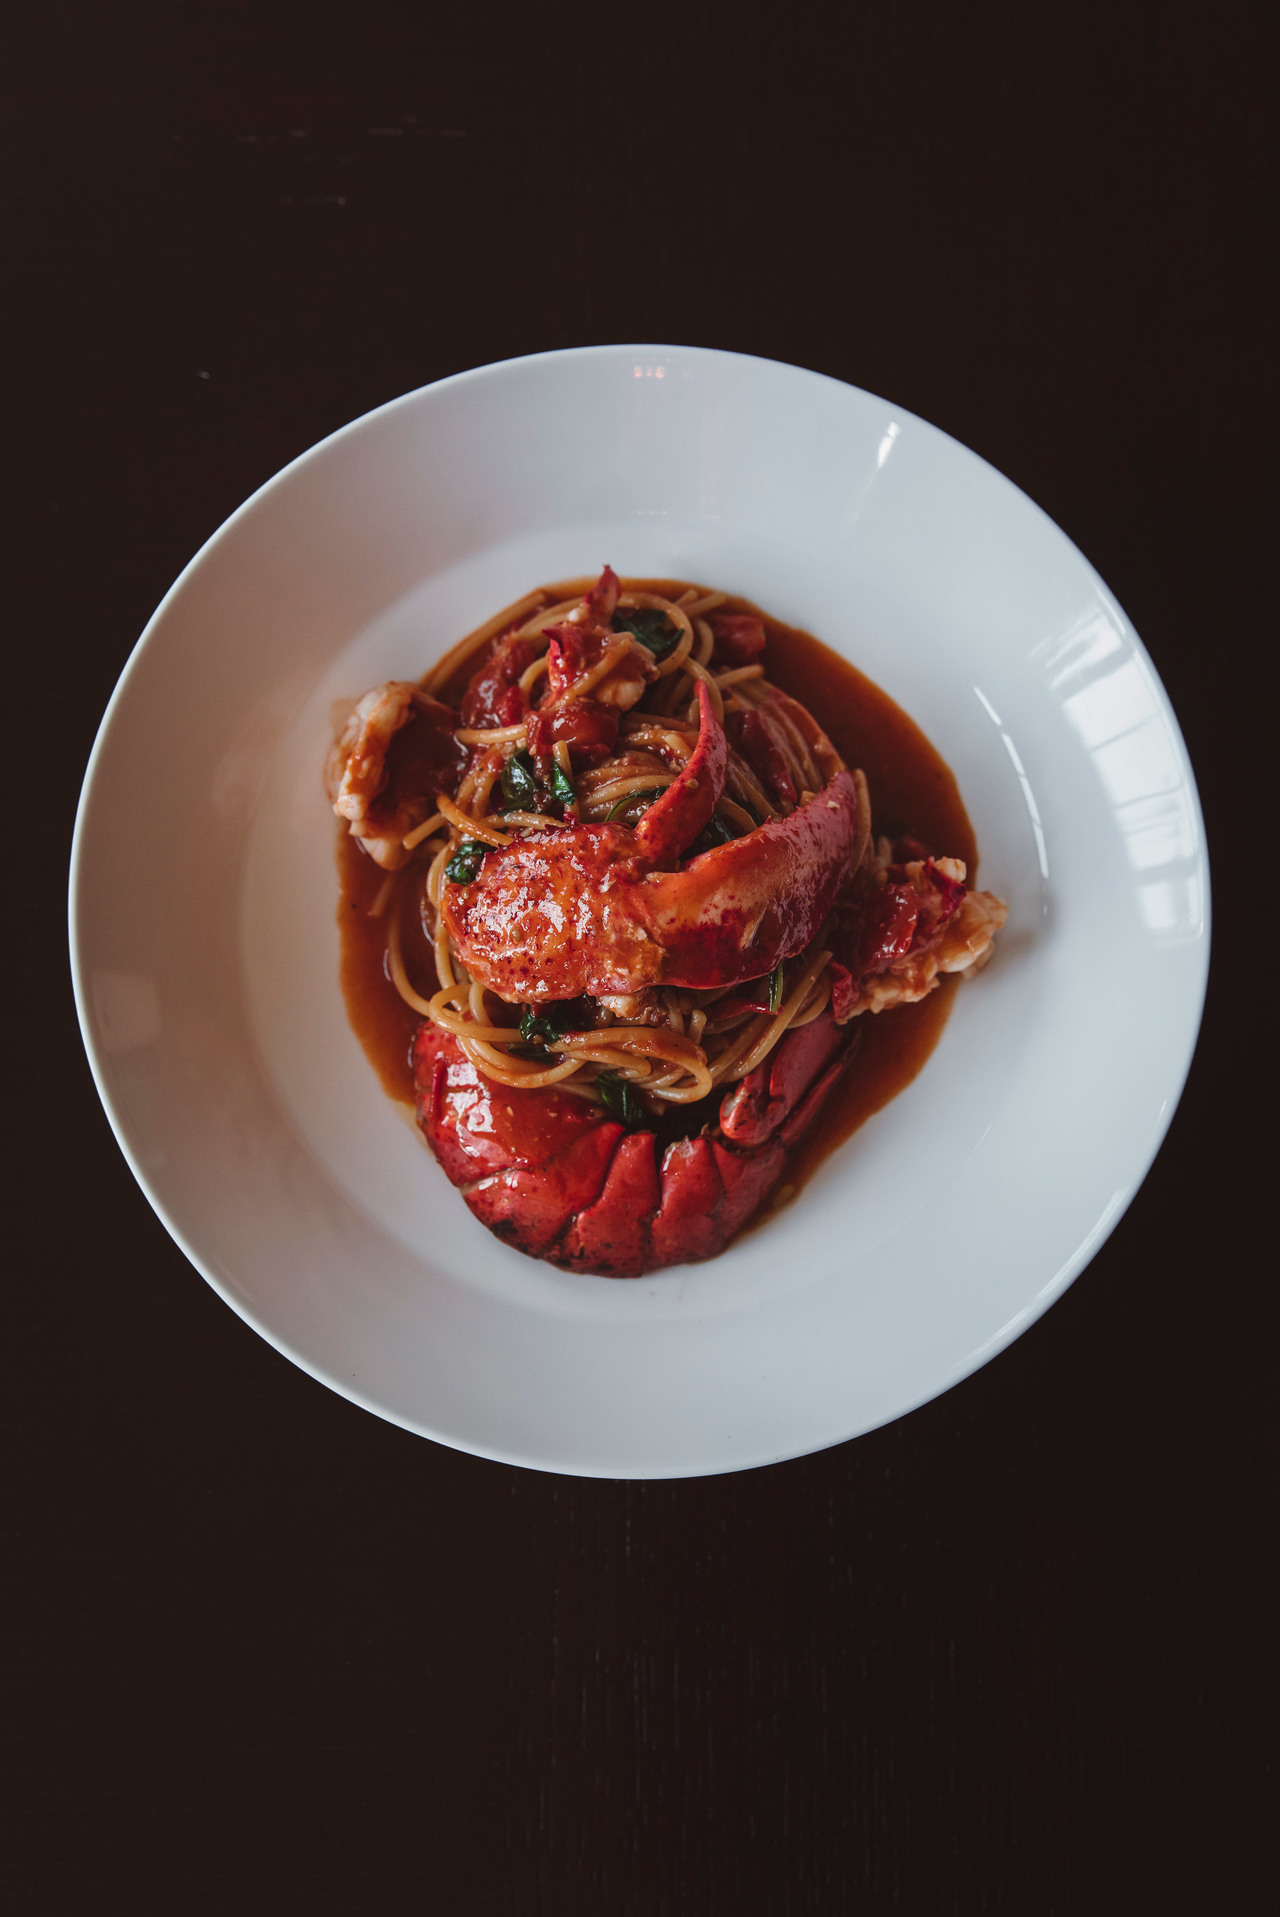 lobster linguine in a red sauce